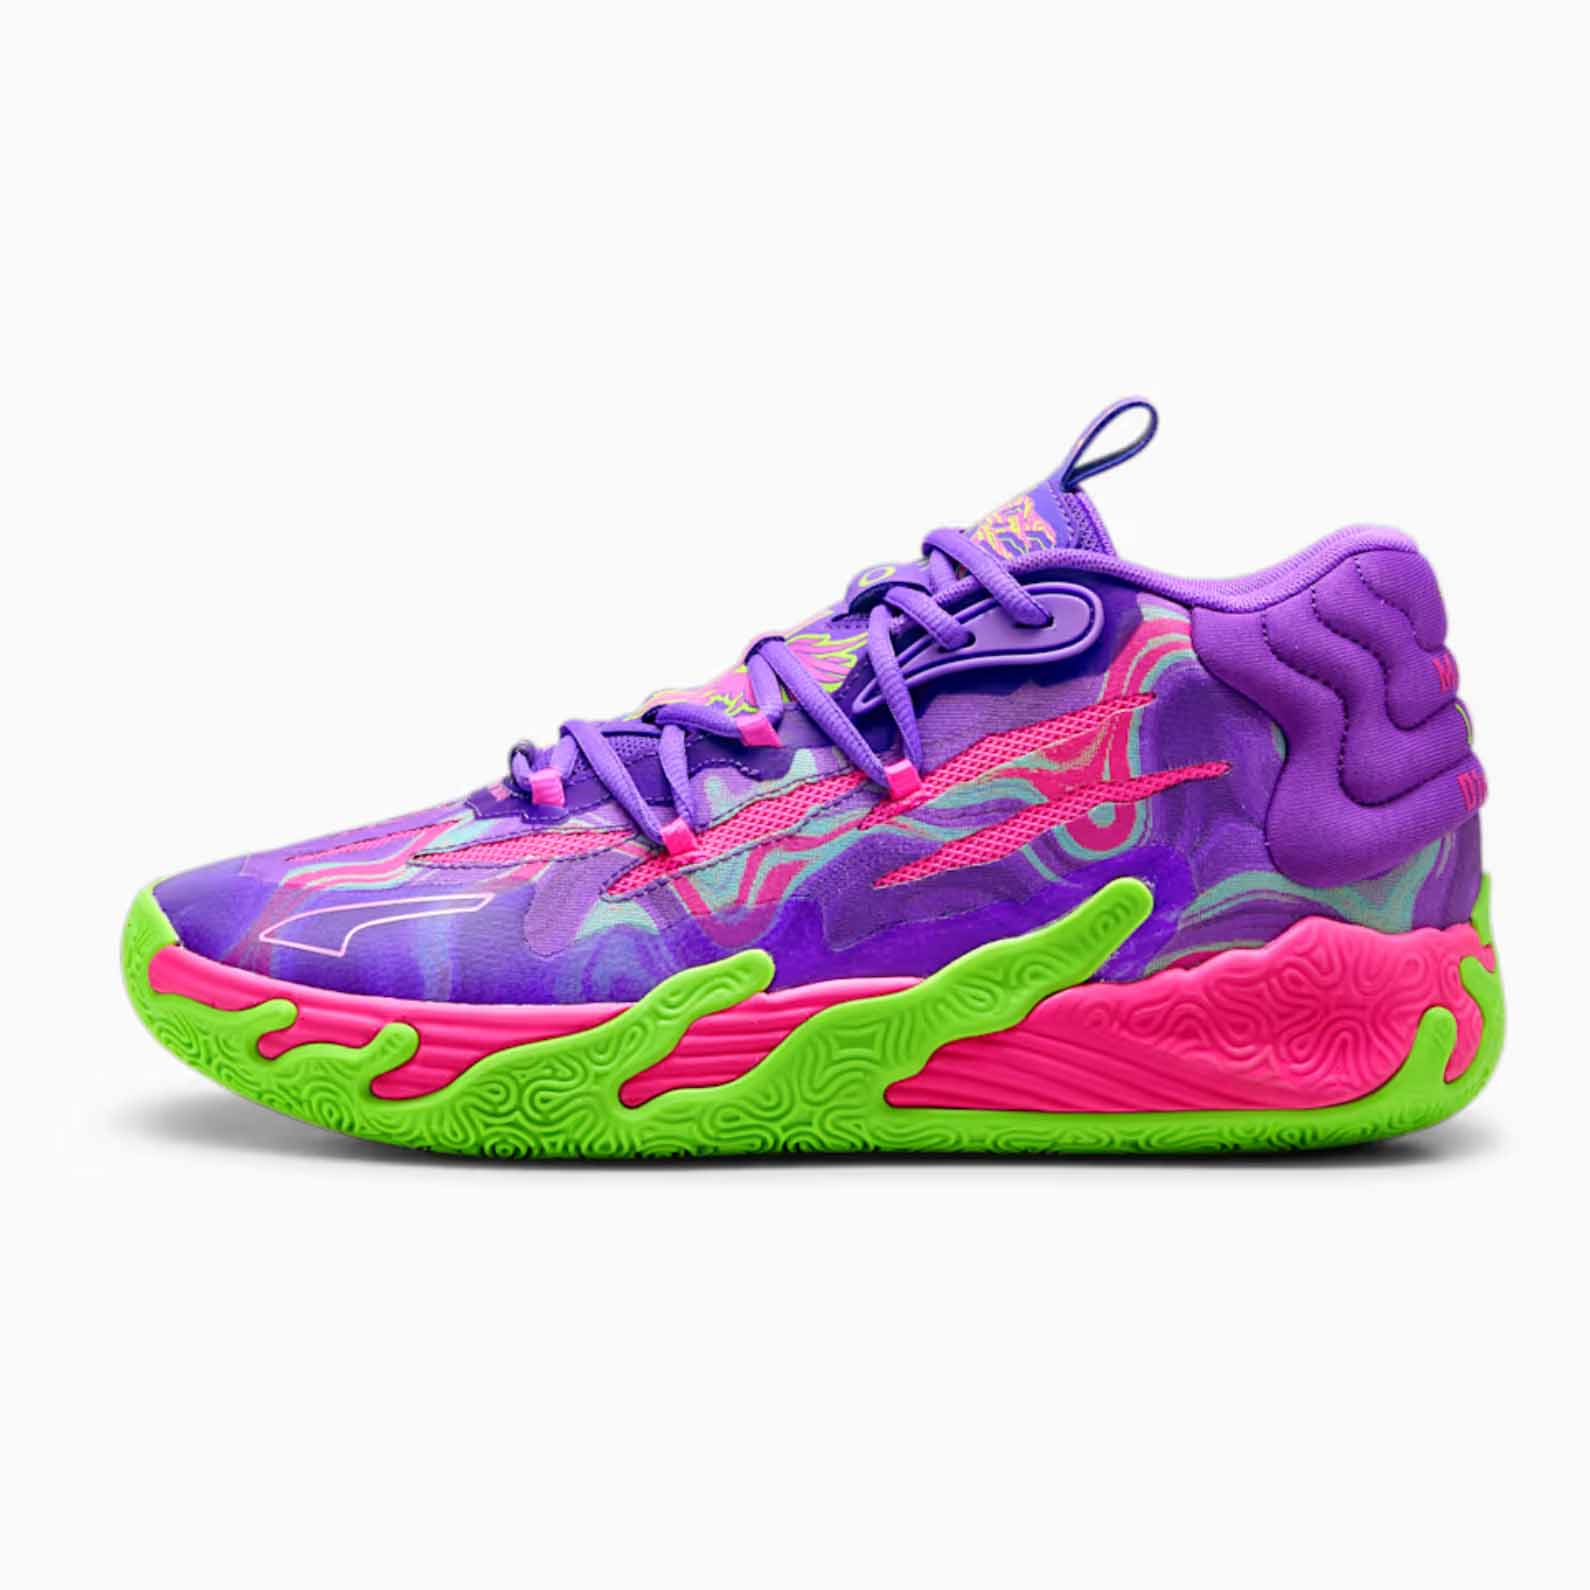 PUMA x LAMELO BALL MB.03 Toxic Men's Basketball Shoes in purple, green and pink